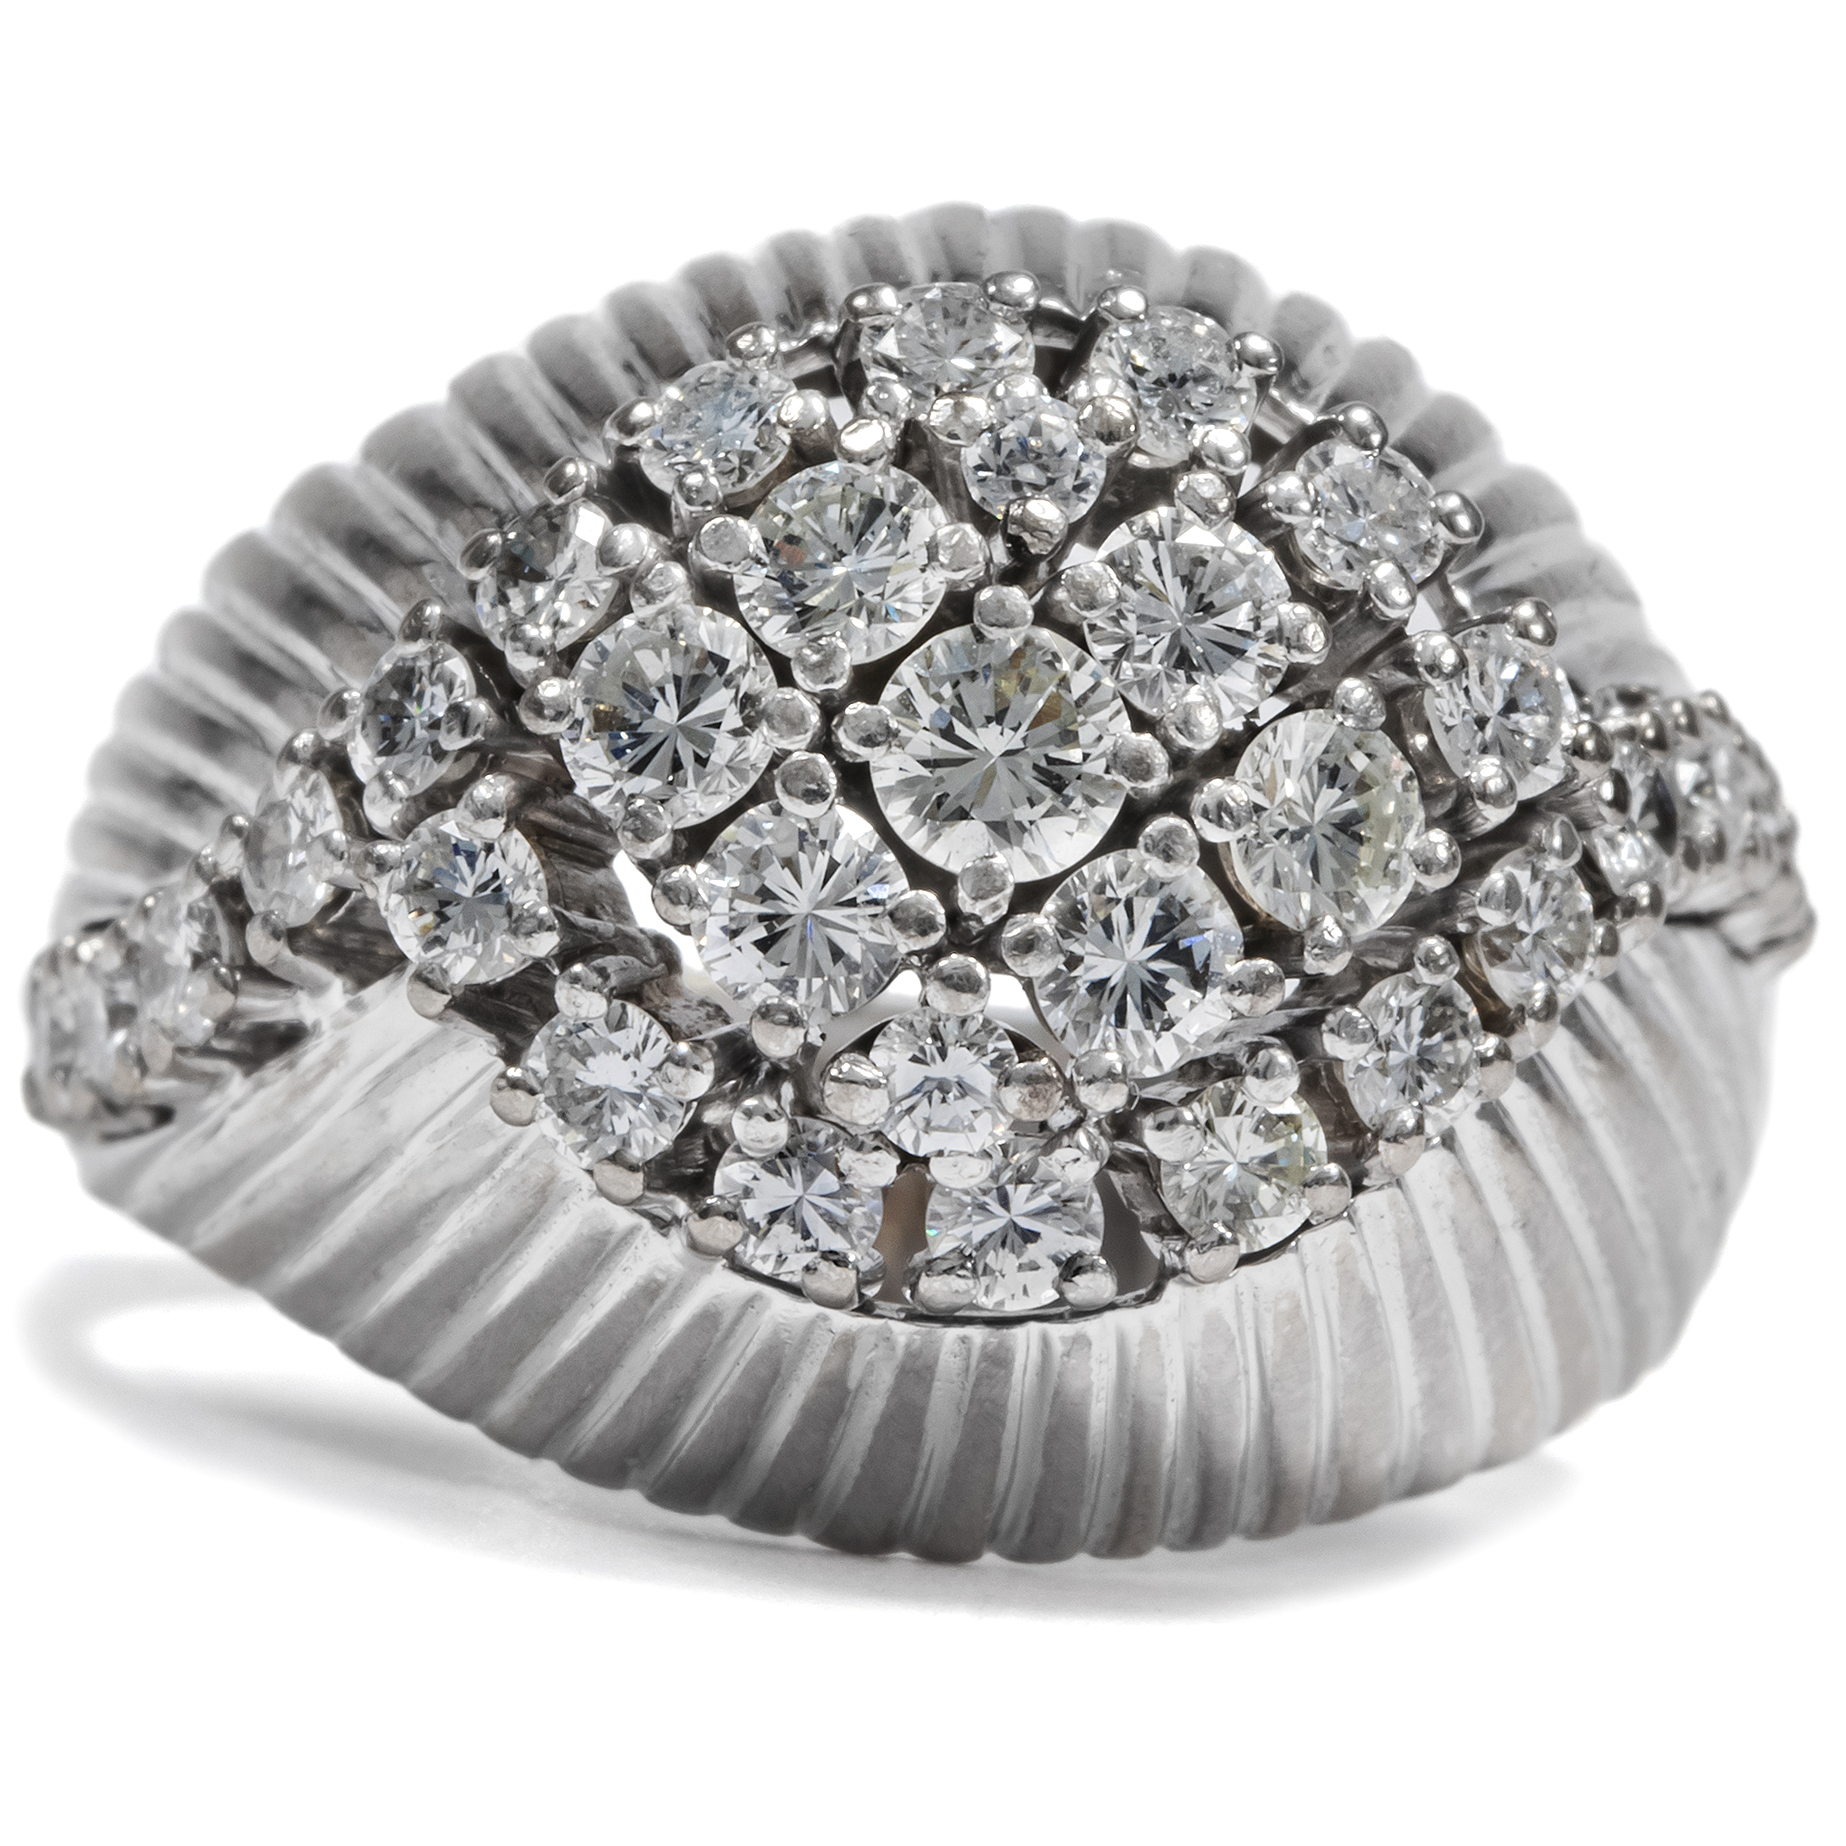 Expressive White Gold Ring With 1.25 ct of Diamonds, ca. 1970